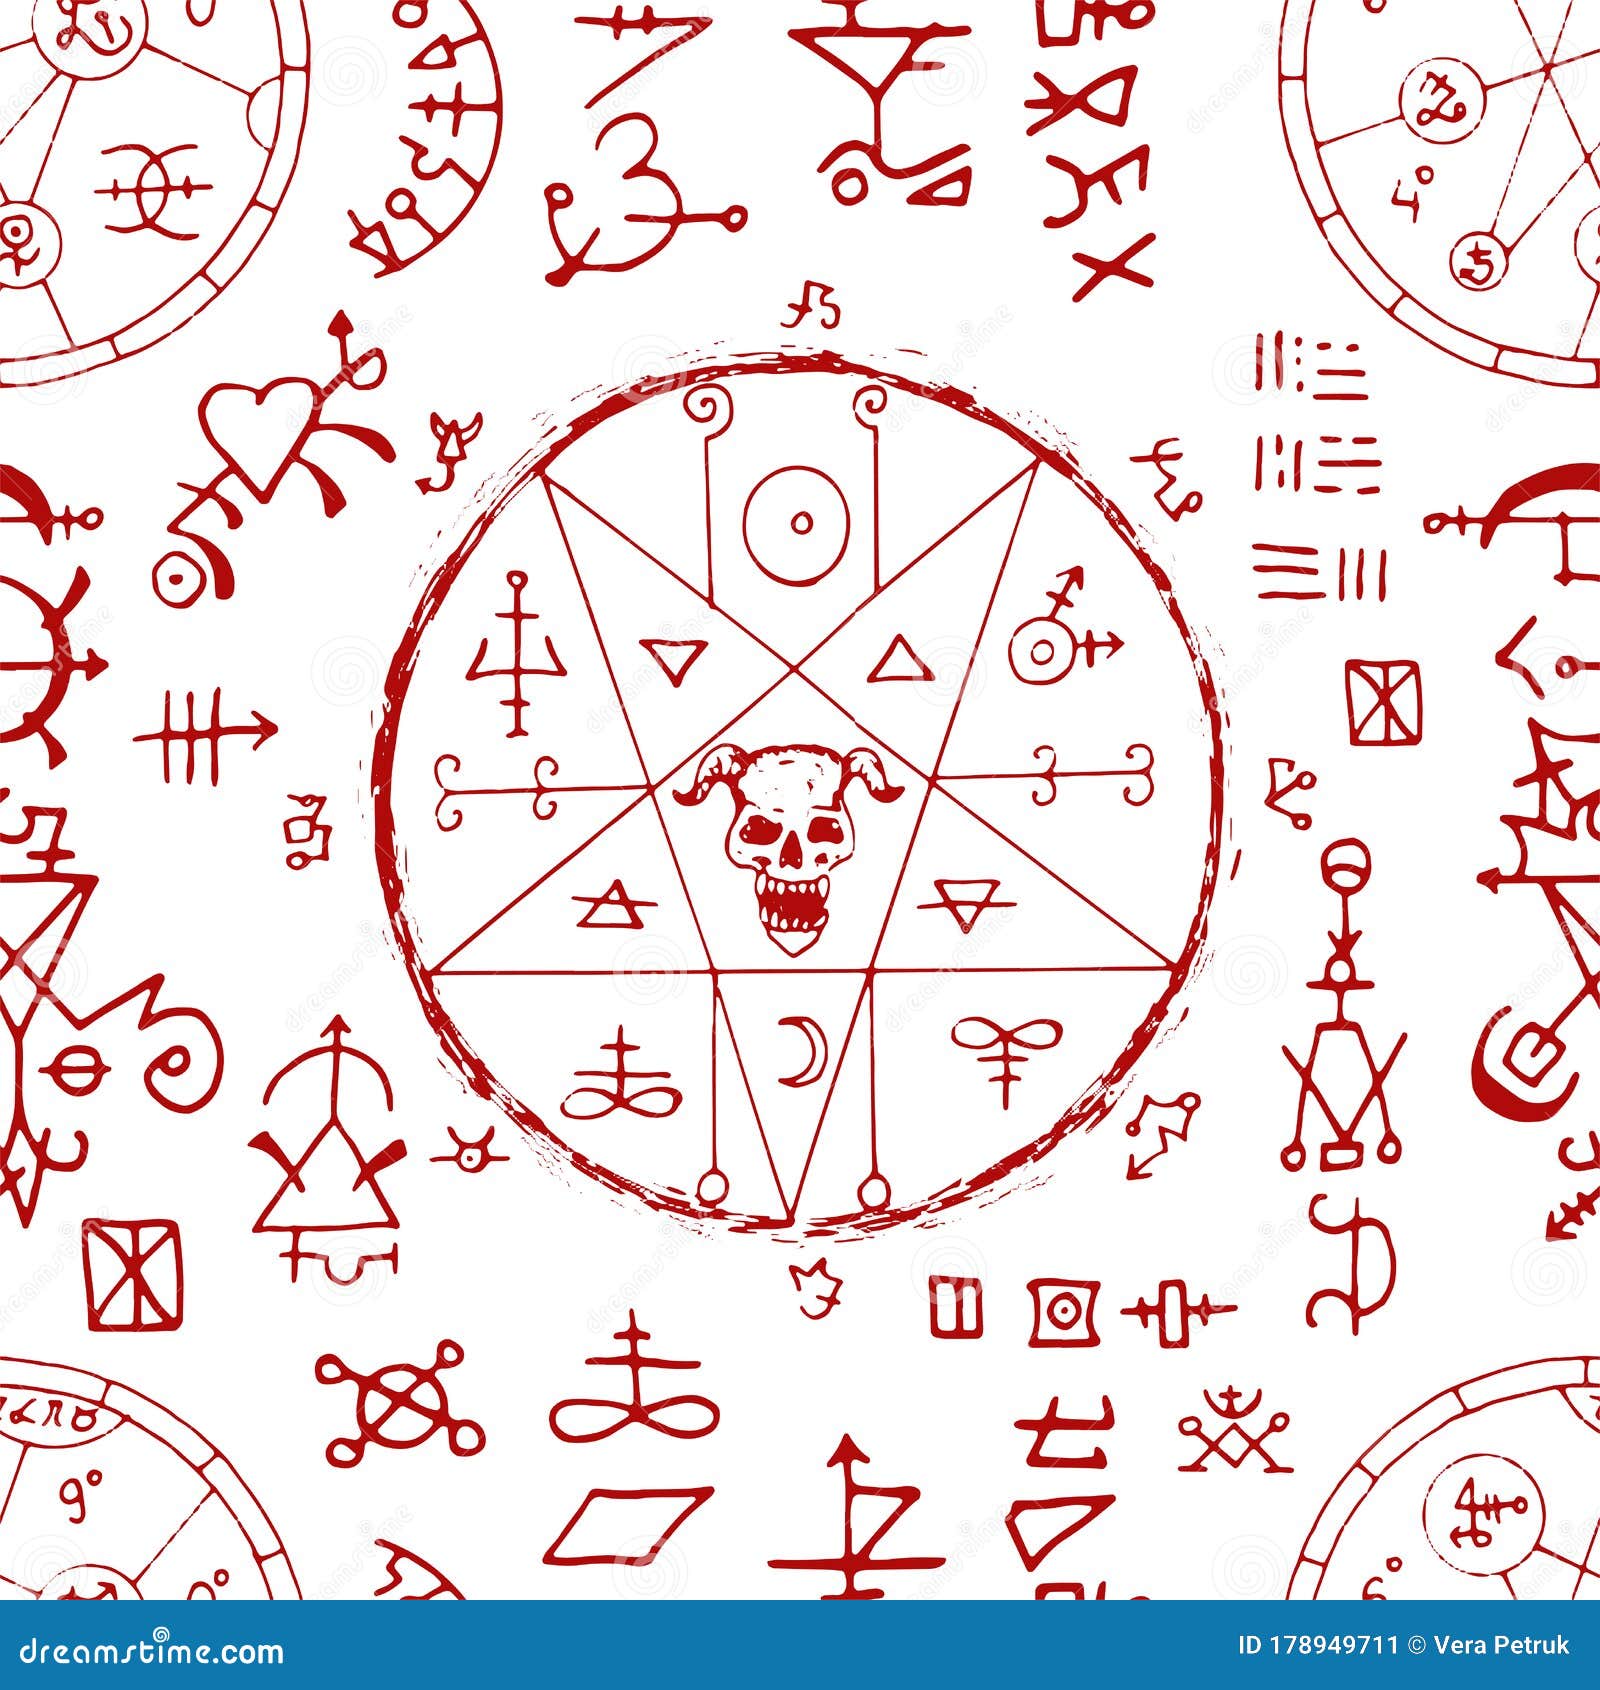 https://thumbs.dreamstime.com/z/seamless-pattern-devil-alchemy-signs-magic-seals-white-background-seamless-pattern-devil-alchemy-signs-magic-178949711.jpg